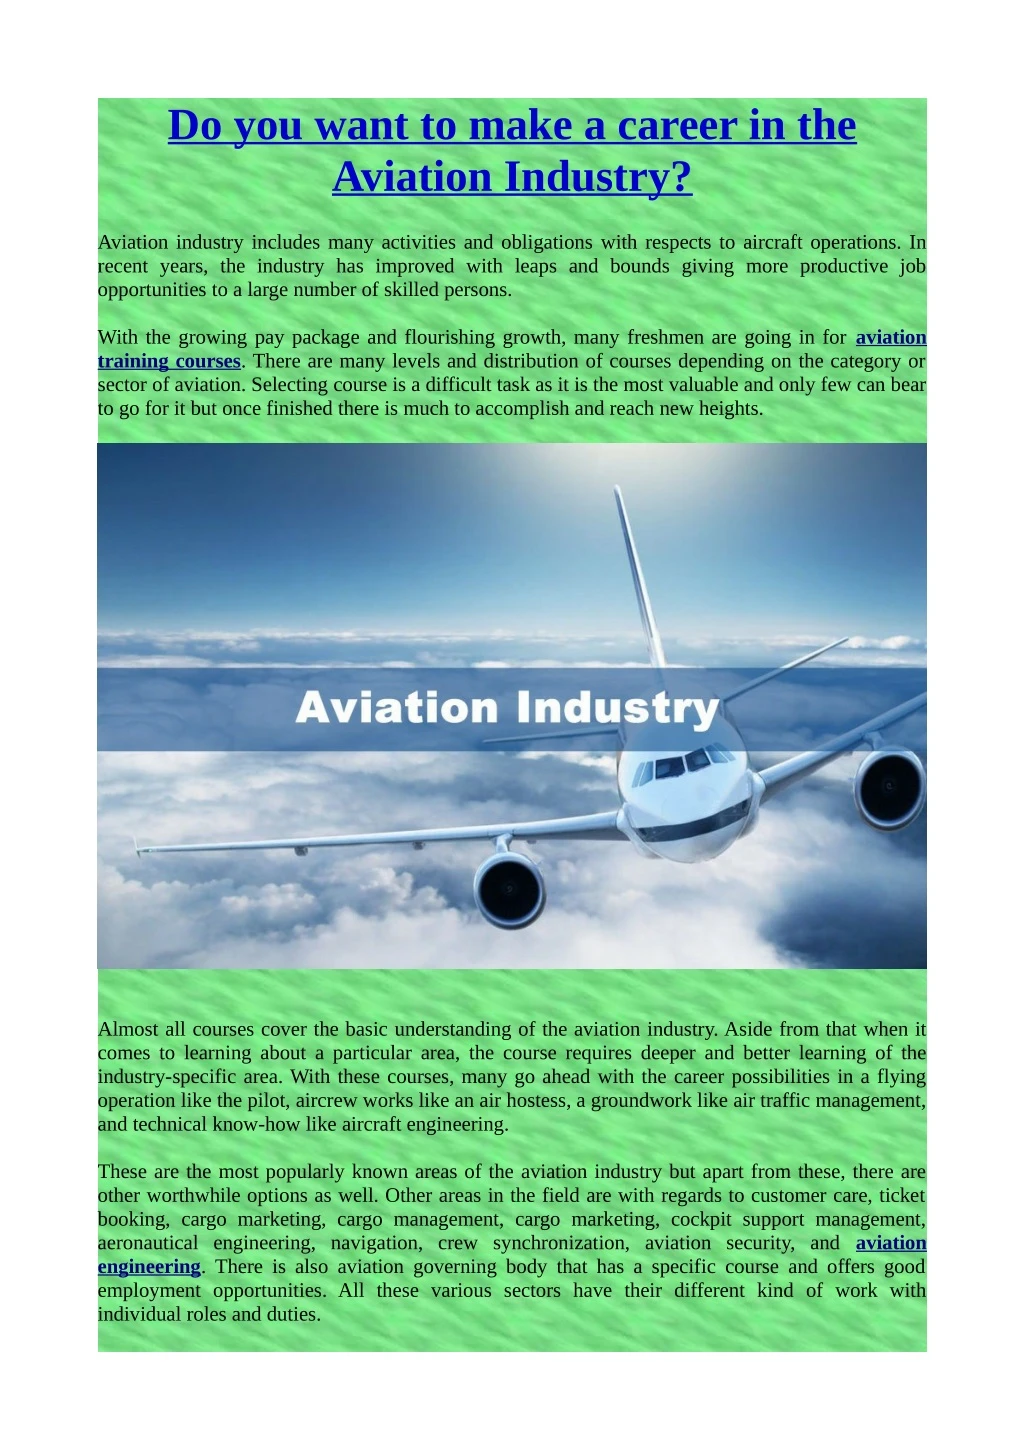 do you want to make a career in the aviation